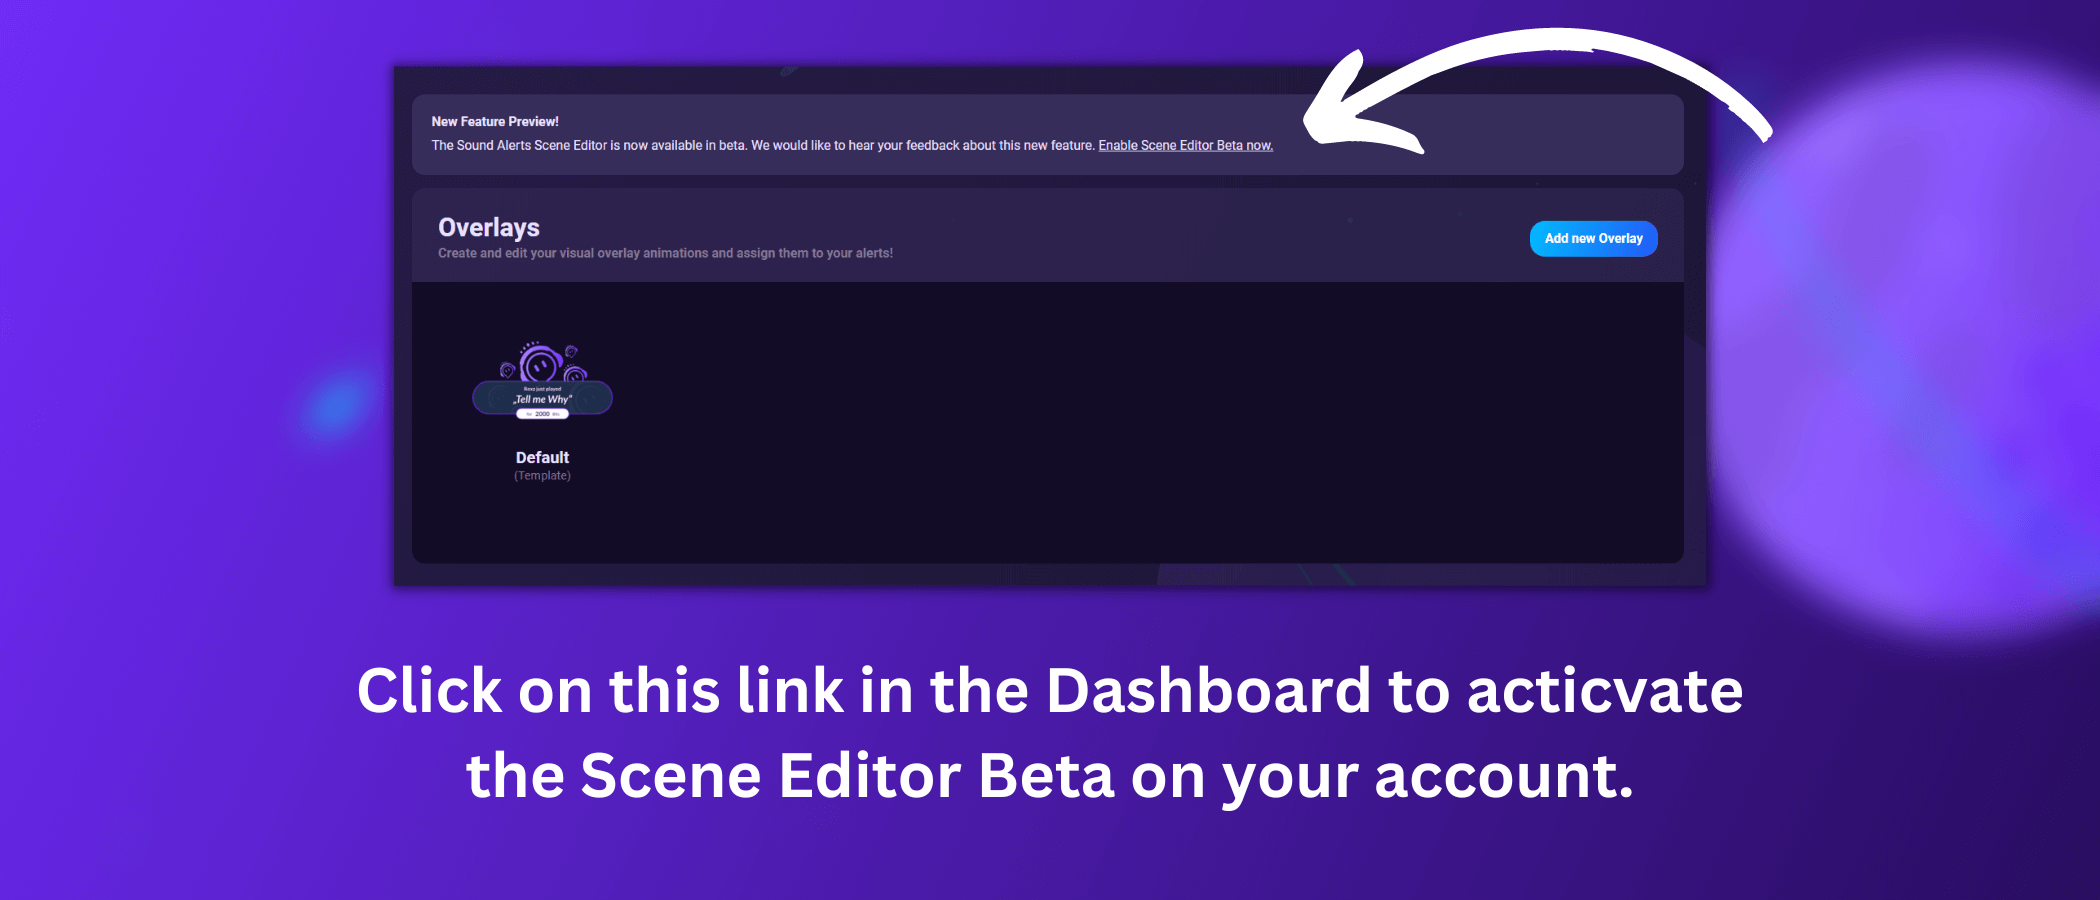 This image displays how you can activate the Scene Editor Beta for Sound Alerts in the overlay settings.